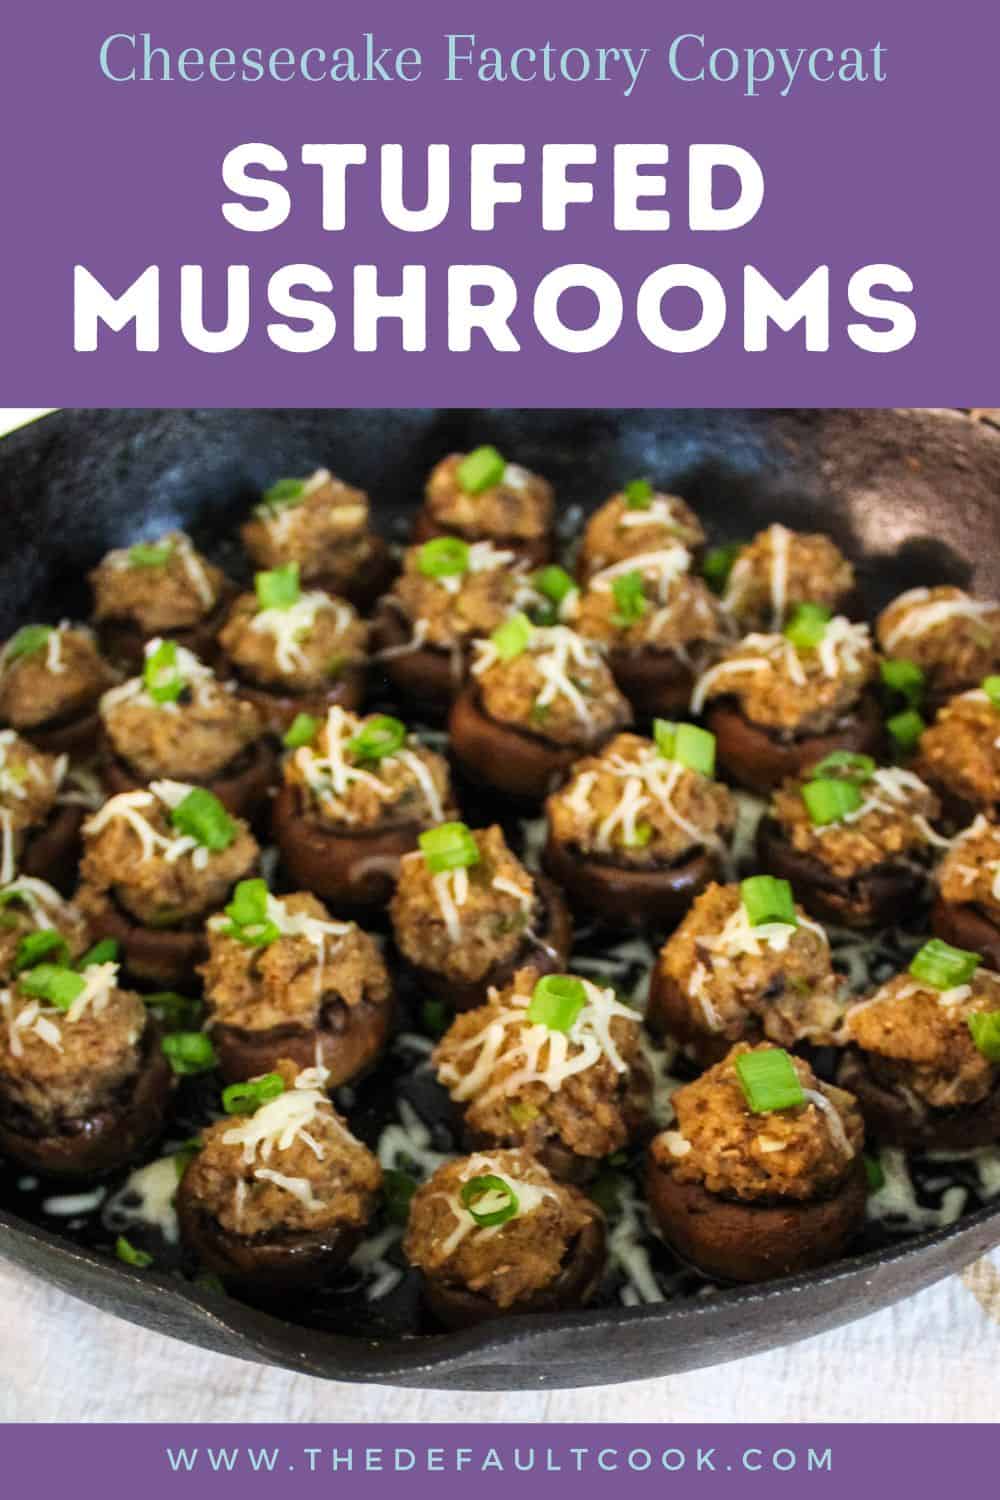 Pan of finished mushrooms with title above